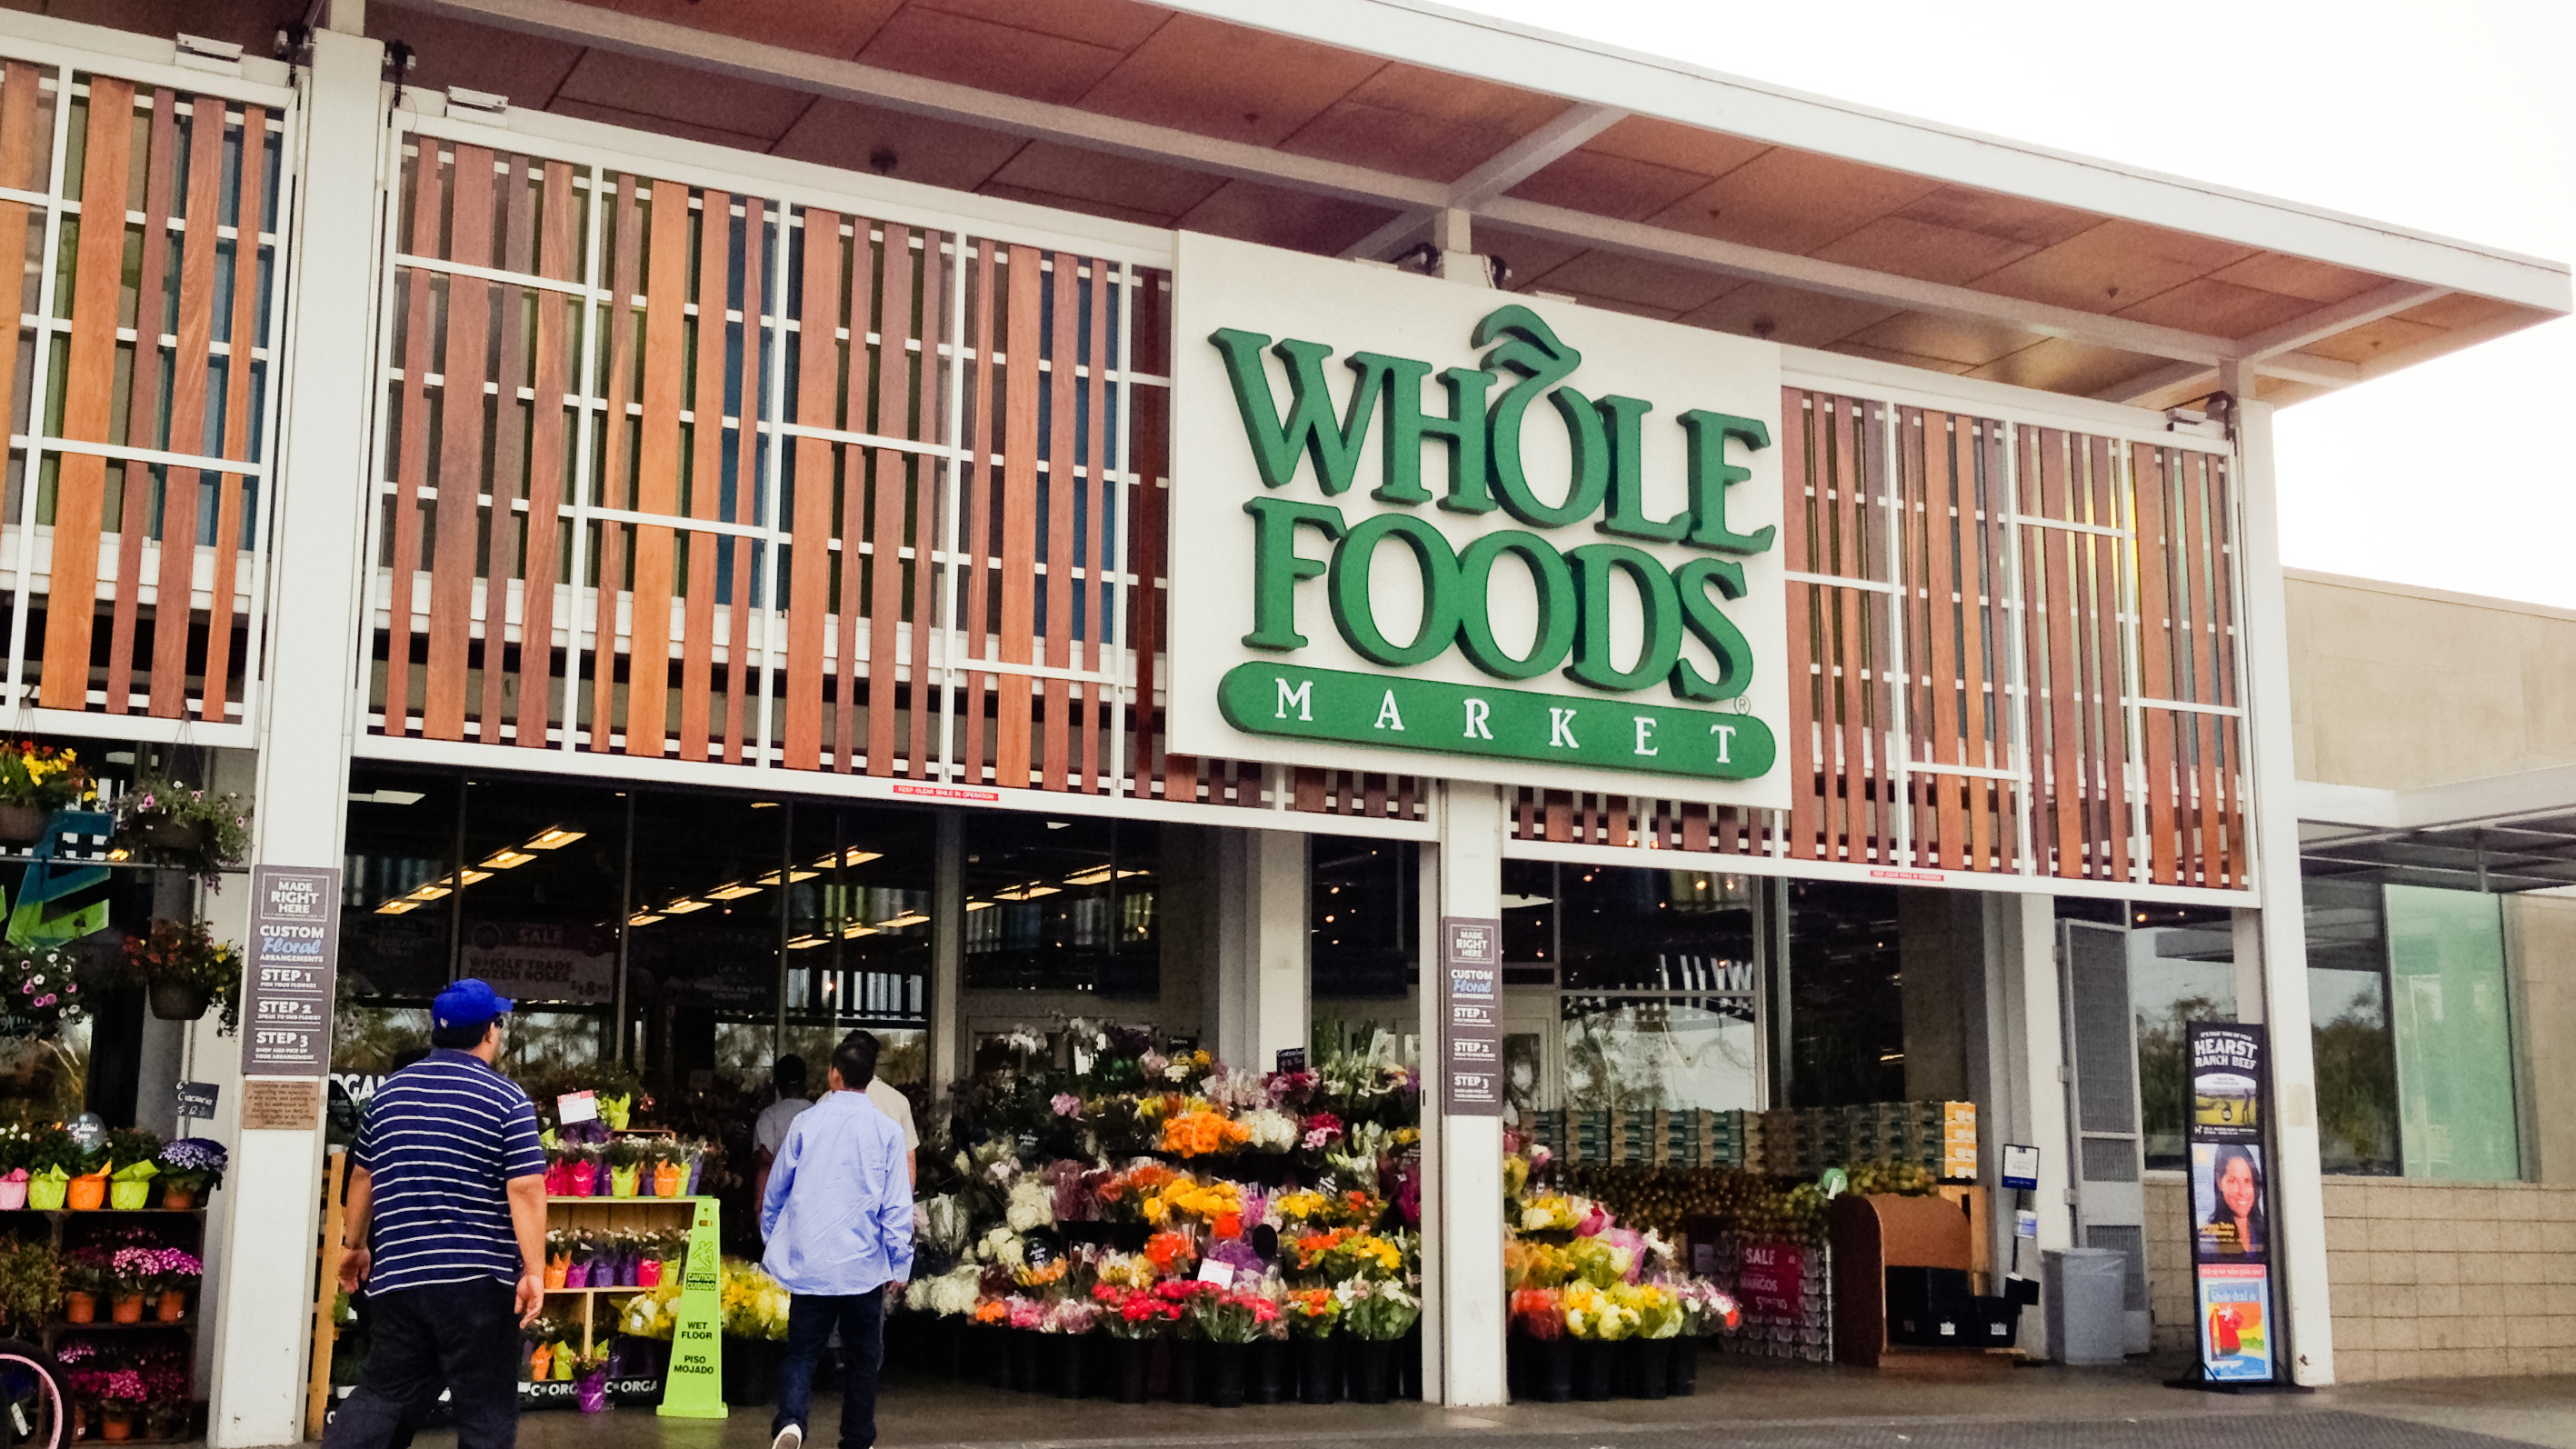 owned Whole Foods adds $10 delivery surcharge - The Washington Post